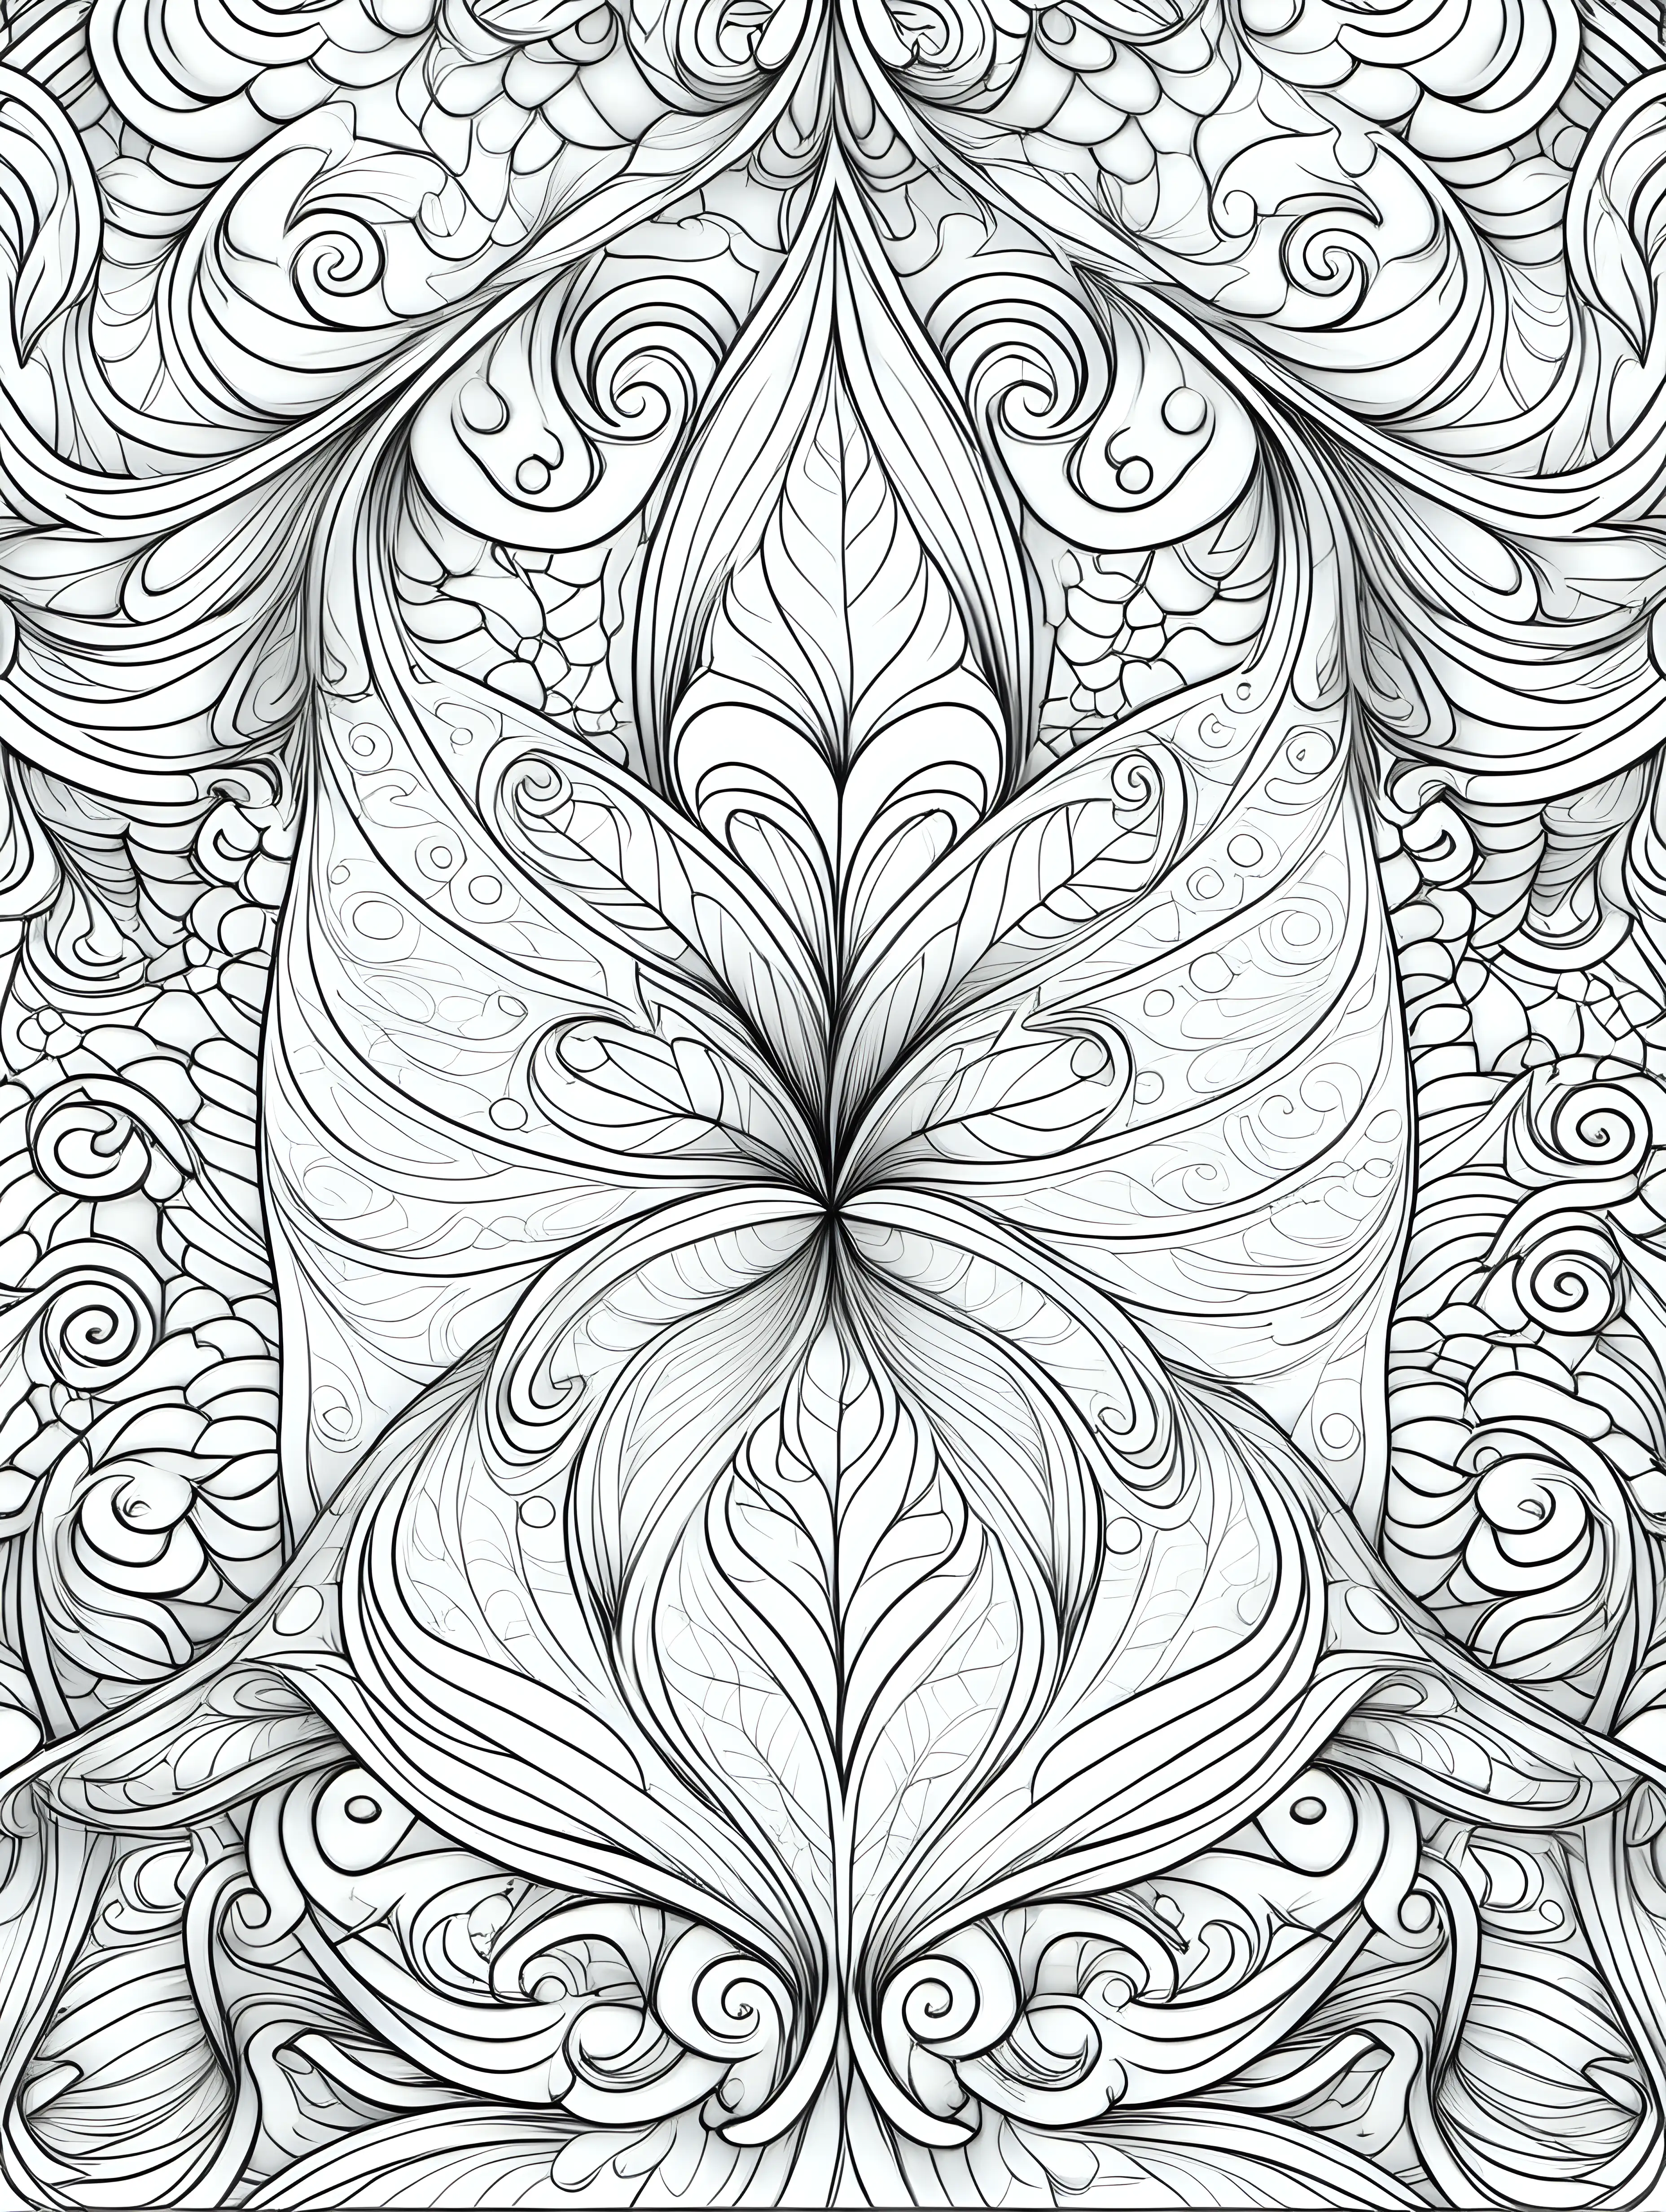 Enchanting Magical Patterns for Adult Coloring Book